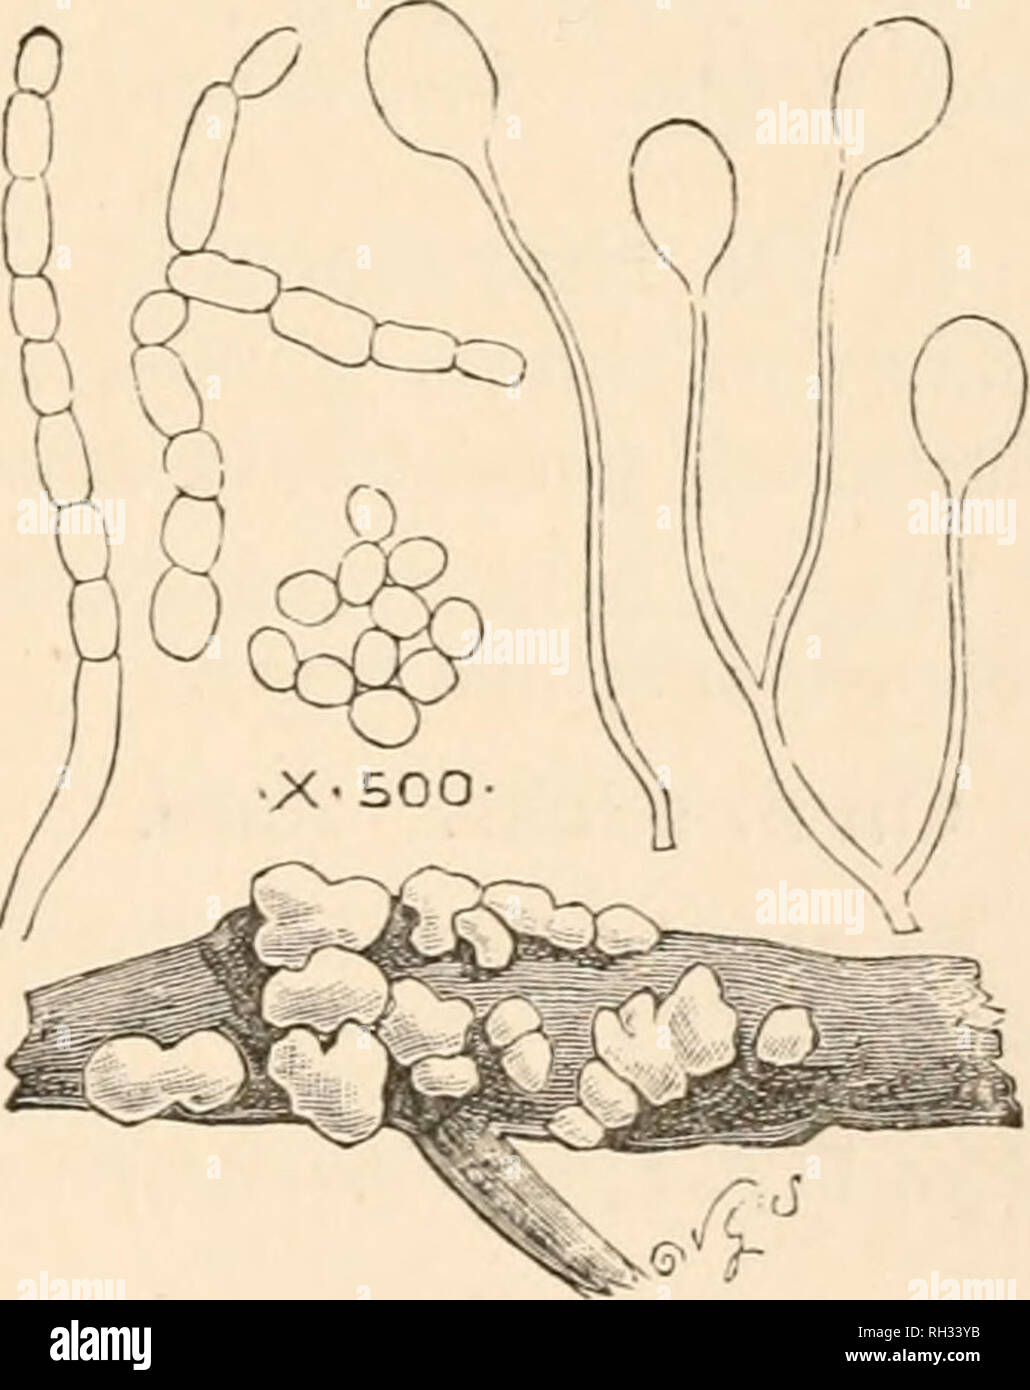 . British fungi (hymenomycetes). Basidiomycetes; Fungi -- Great Britain. C. Guepinia helvelloides. One- half natural size. , a fungus). Dacrymyces. GENUS LXIII. — Dacrymyces (SOK/W, a tear; Nees Syst. p. 89. Gelatinous, homogeneous, pervaded internally with septate fibres; conidia linked together like a necklace ; sporophores clavate at the end of the filaments, bifurcate when mature ; spores septate. Tul. Ann. Sc. Nat. 1853, /. n. f. 19. /. 1 2. Fr. Hym. Eur. p. 697. * Red. ** Yellowish. *** Pa Hid o r fusco us. * Red. 1. D. macrosporus B. £ Br. — Rose-colour, gelatinous, tubcrculated. Formin Stock Photo